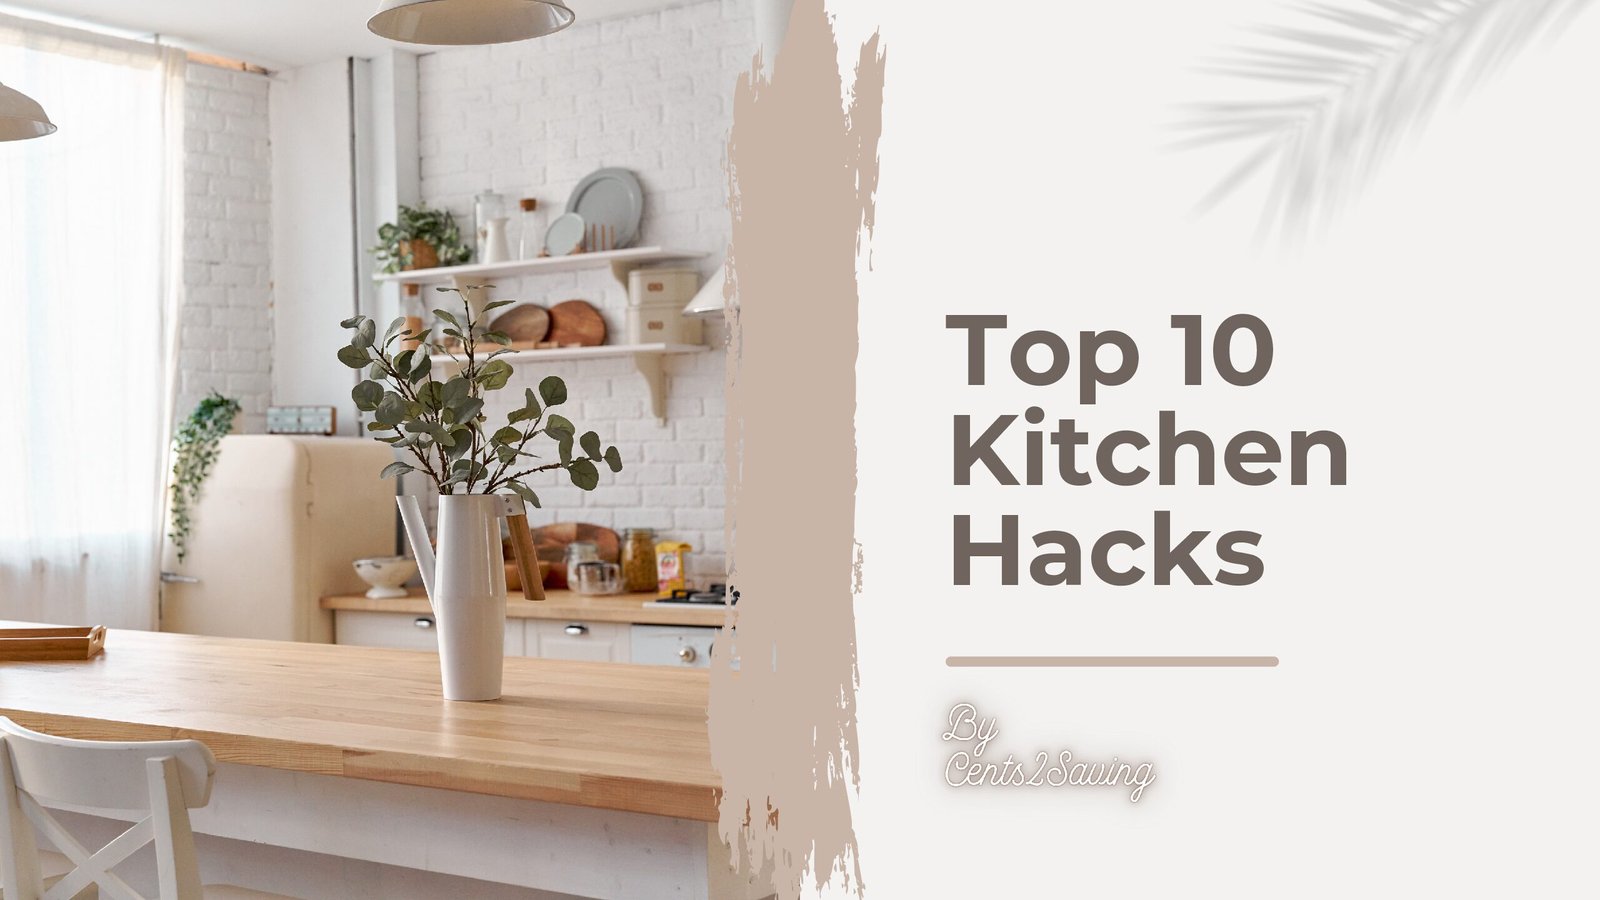 Top 10 Kitchen Hacks: Innovative Gadgets to Simplify Your Cooking Experience